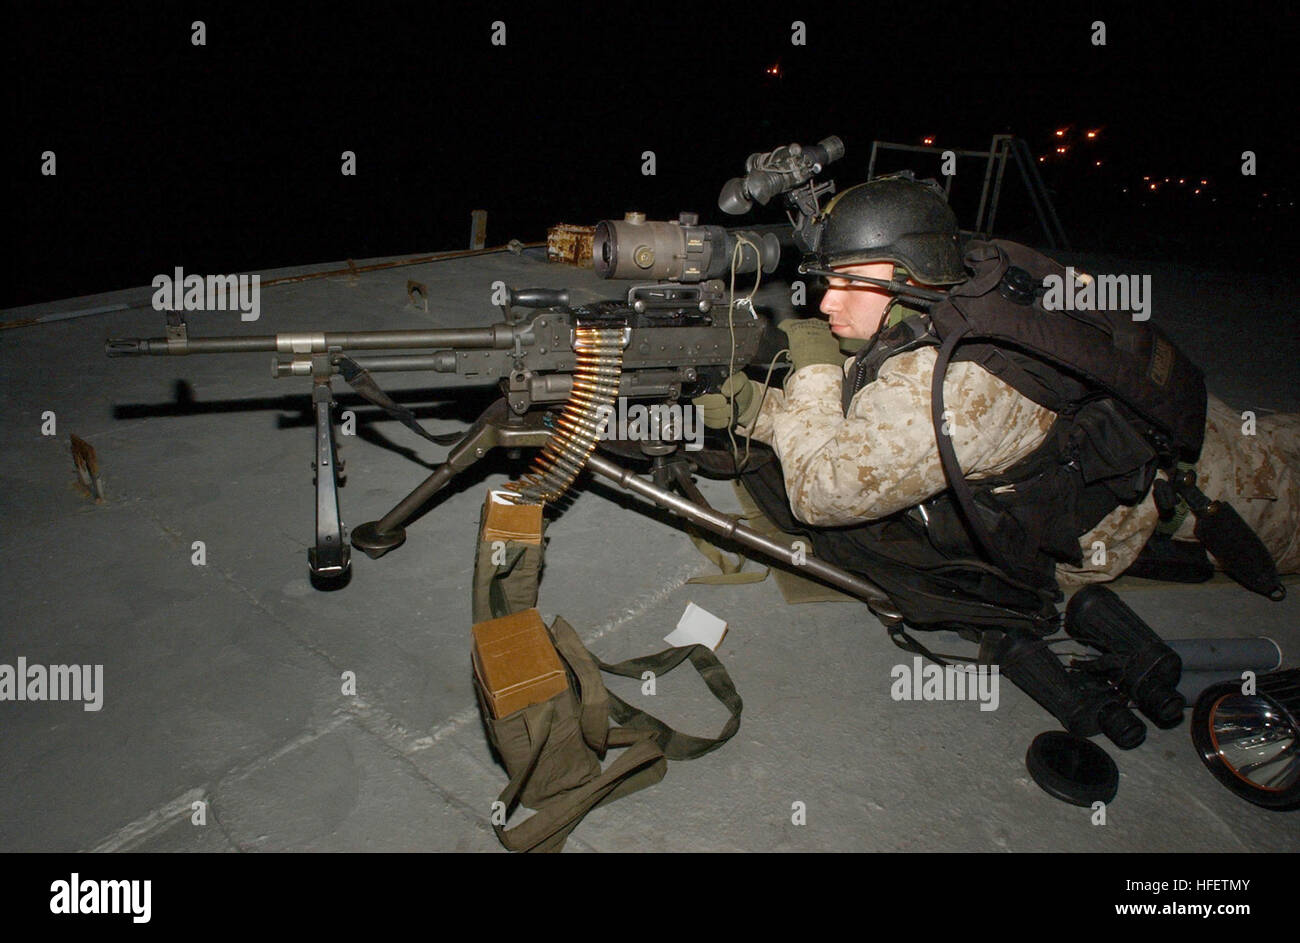 040130-N-0331L-008 Arabian Gulf (Jan. 30, 2004)- Pfc. Justin McLachlan assigned to the 1st Fleet Anti-terrorism Security Team (FAST) 6th Platoon, scans the horizon for the enemy during a training exercise in the region. The guided missile cruiser USS Philippine Sea (CG 58) and 1st FAST 6th Platoon and are forward deployed to the Arabian Sea in support of Operations Iraqi Freedom and Enduring Freedom. U.S. Navy photo by Photographer's Mate 2nd Class Jeffrey Lehrberg. (RELEASED) US Navy 040130-N-0331L-008 Pfc. Justin McLachlan assigned to the 1st Fleet Anti-terrorism Security Team (FAST) 6th Pla Stock Photo